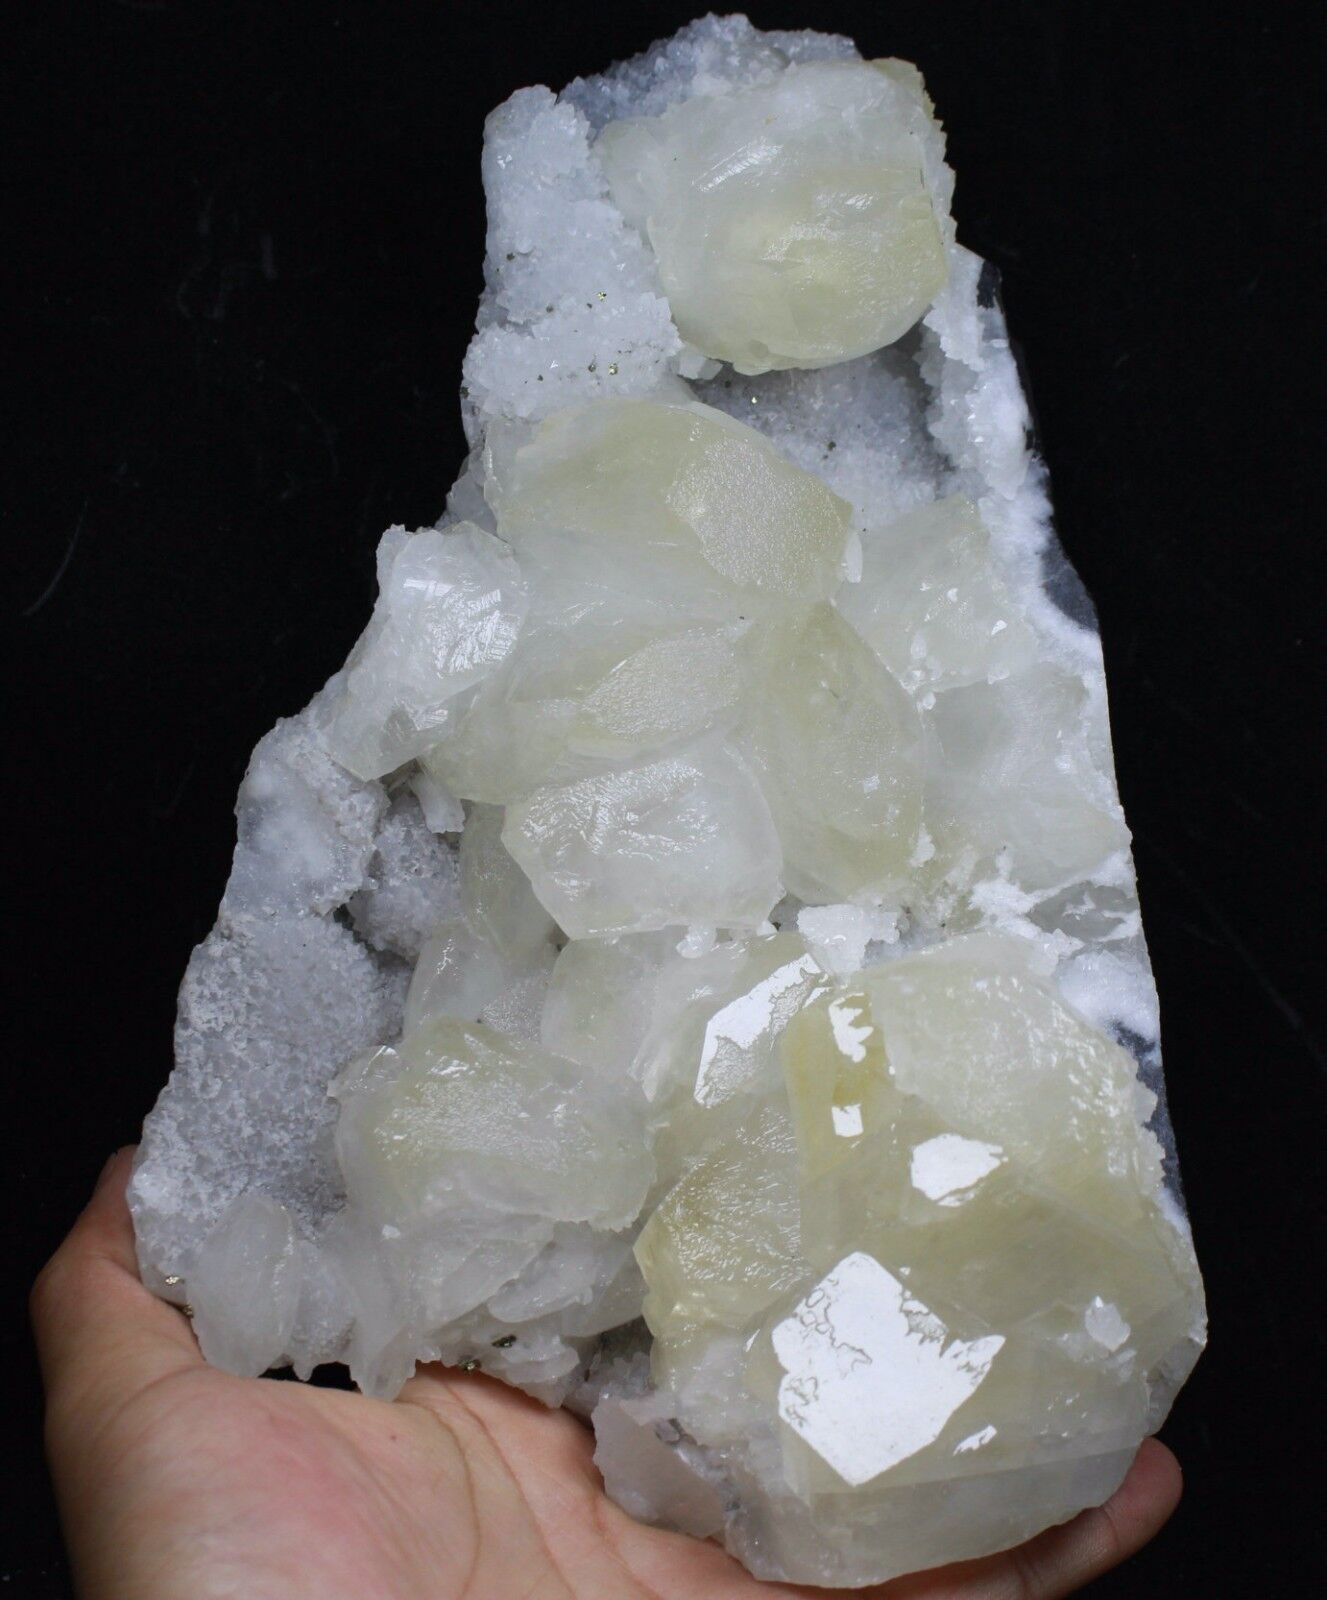 5.21lb Natural Beauty Calcite Cluster Crystal Based on Fluorite Matrix